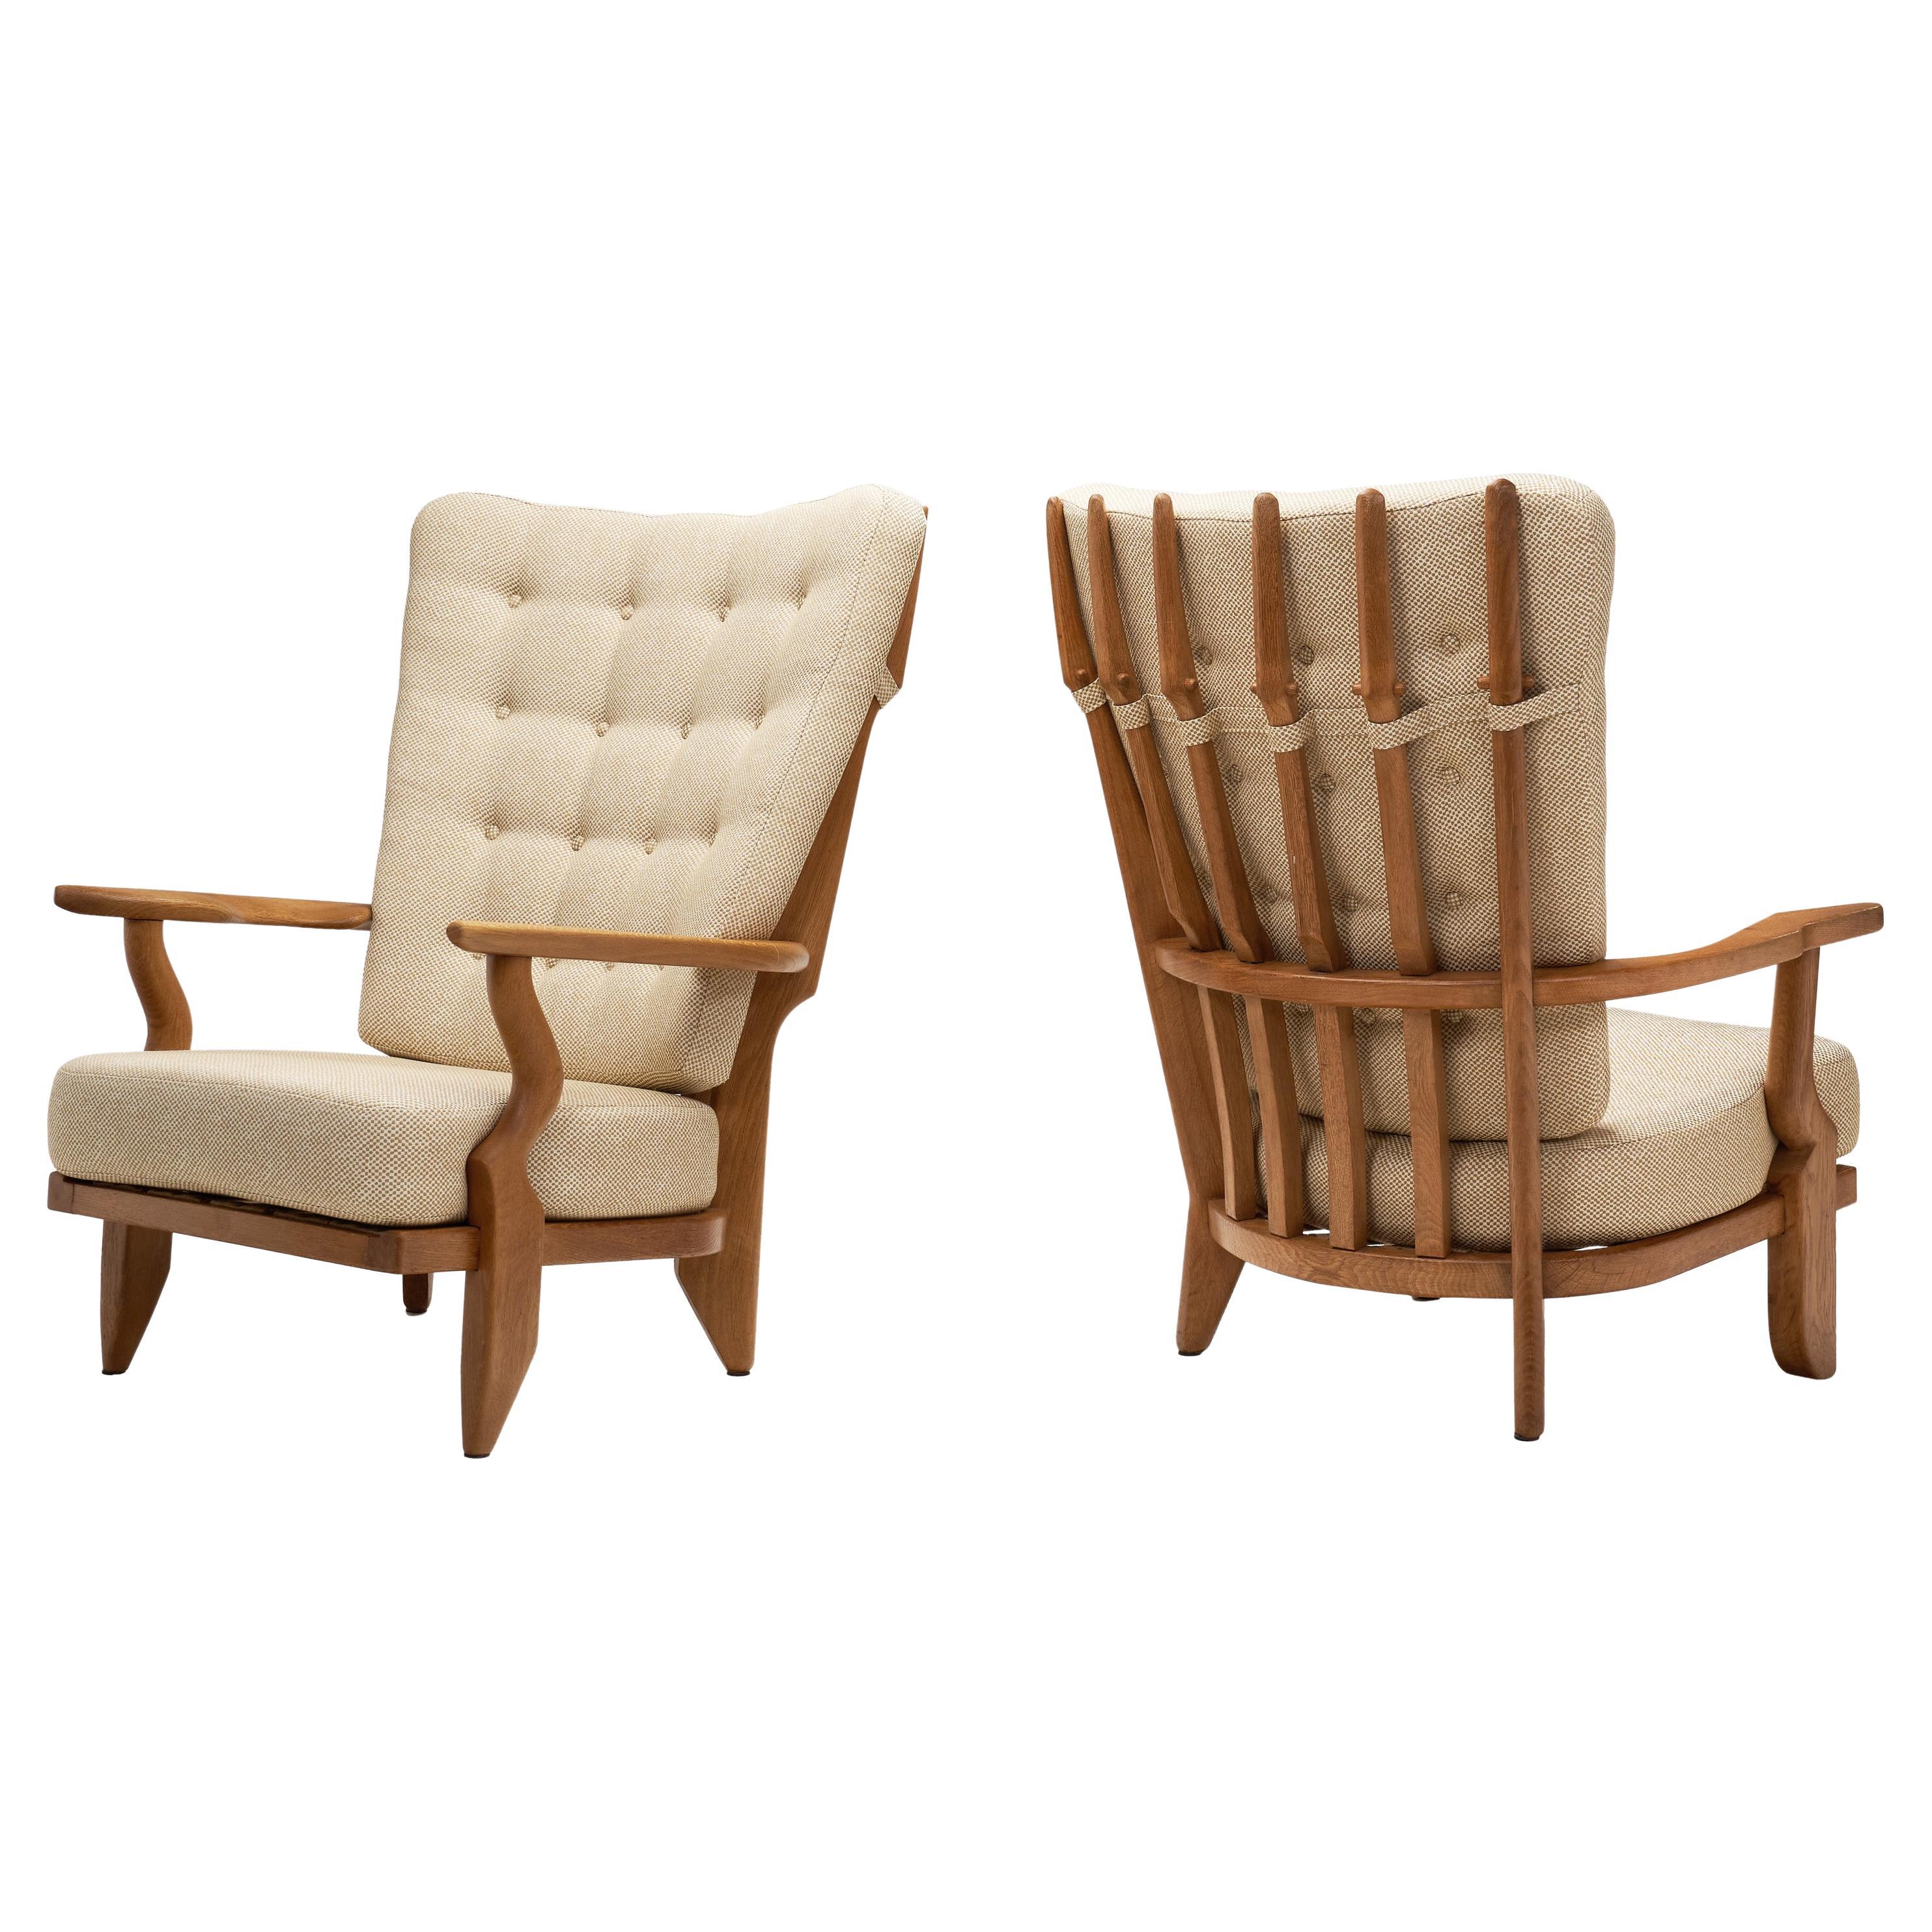 Set of “Grand Repos” Lounge Chairs by Guillerme et Chambron, France 1950s For Sale